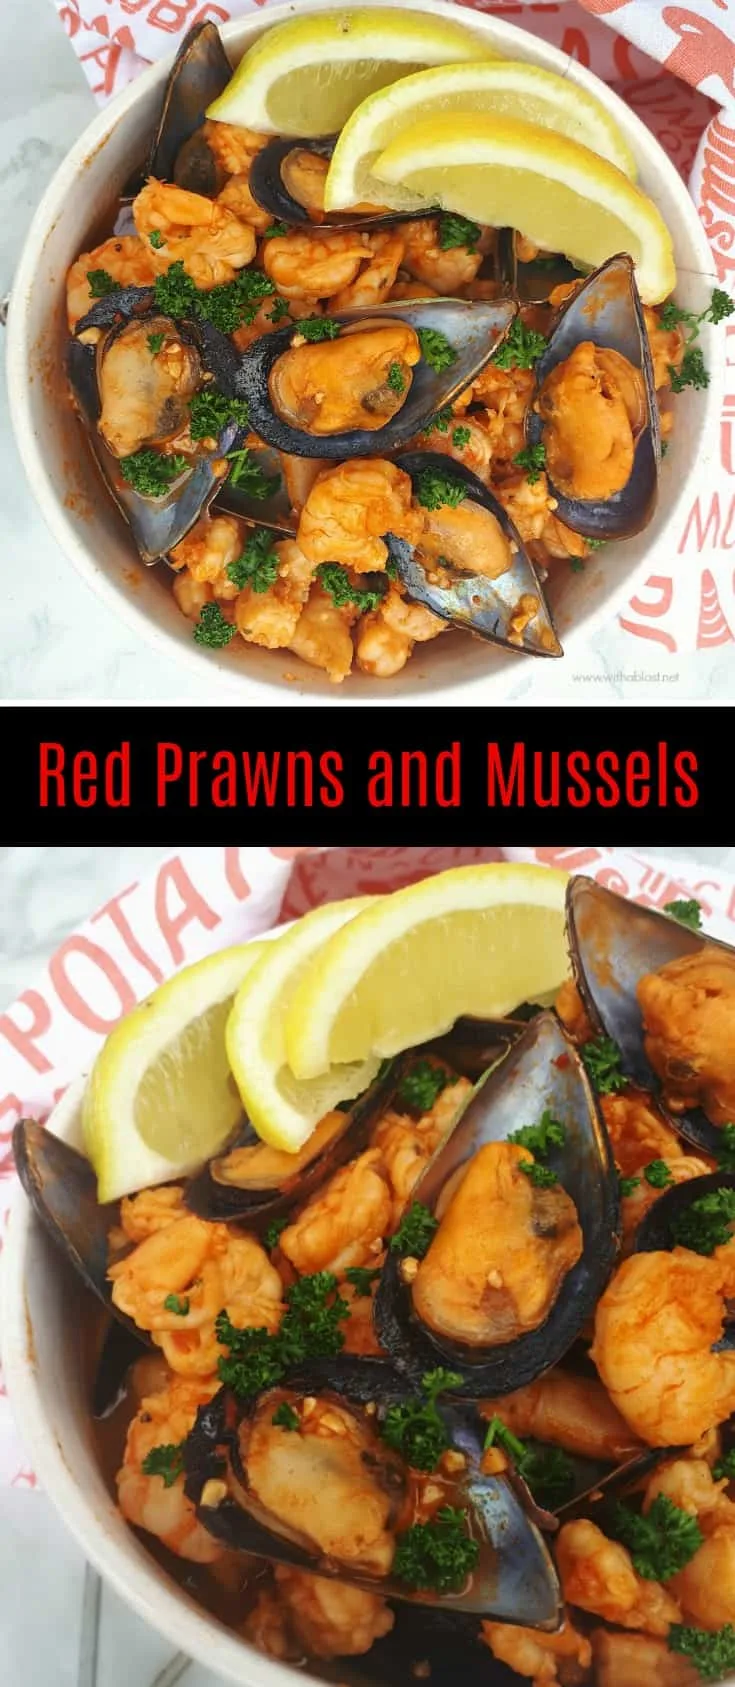 Red Prawns and Mussels are slightly spicy and nestled in a creamy paprika tomato sauce - so quick and easy to serve for dinner or as an appetizer #RedPrawnRecipes #TomatoSaucePrawns #ComfortFood #SeafoodRecipes #EasySeafoodReipes #MusselsRecipe #DinnerRecipes #EasyAppetizerRecipes #ValentinesDayRecipes